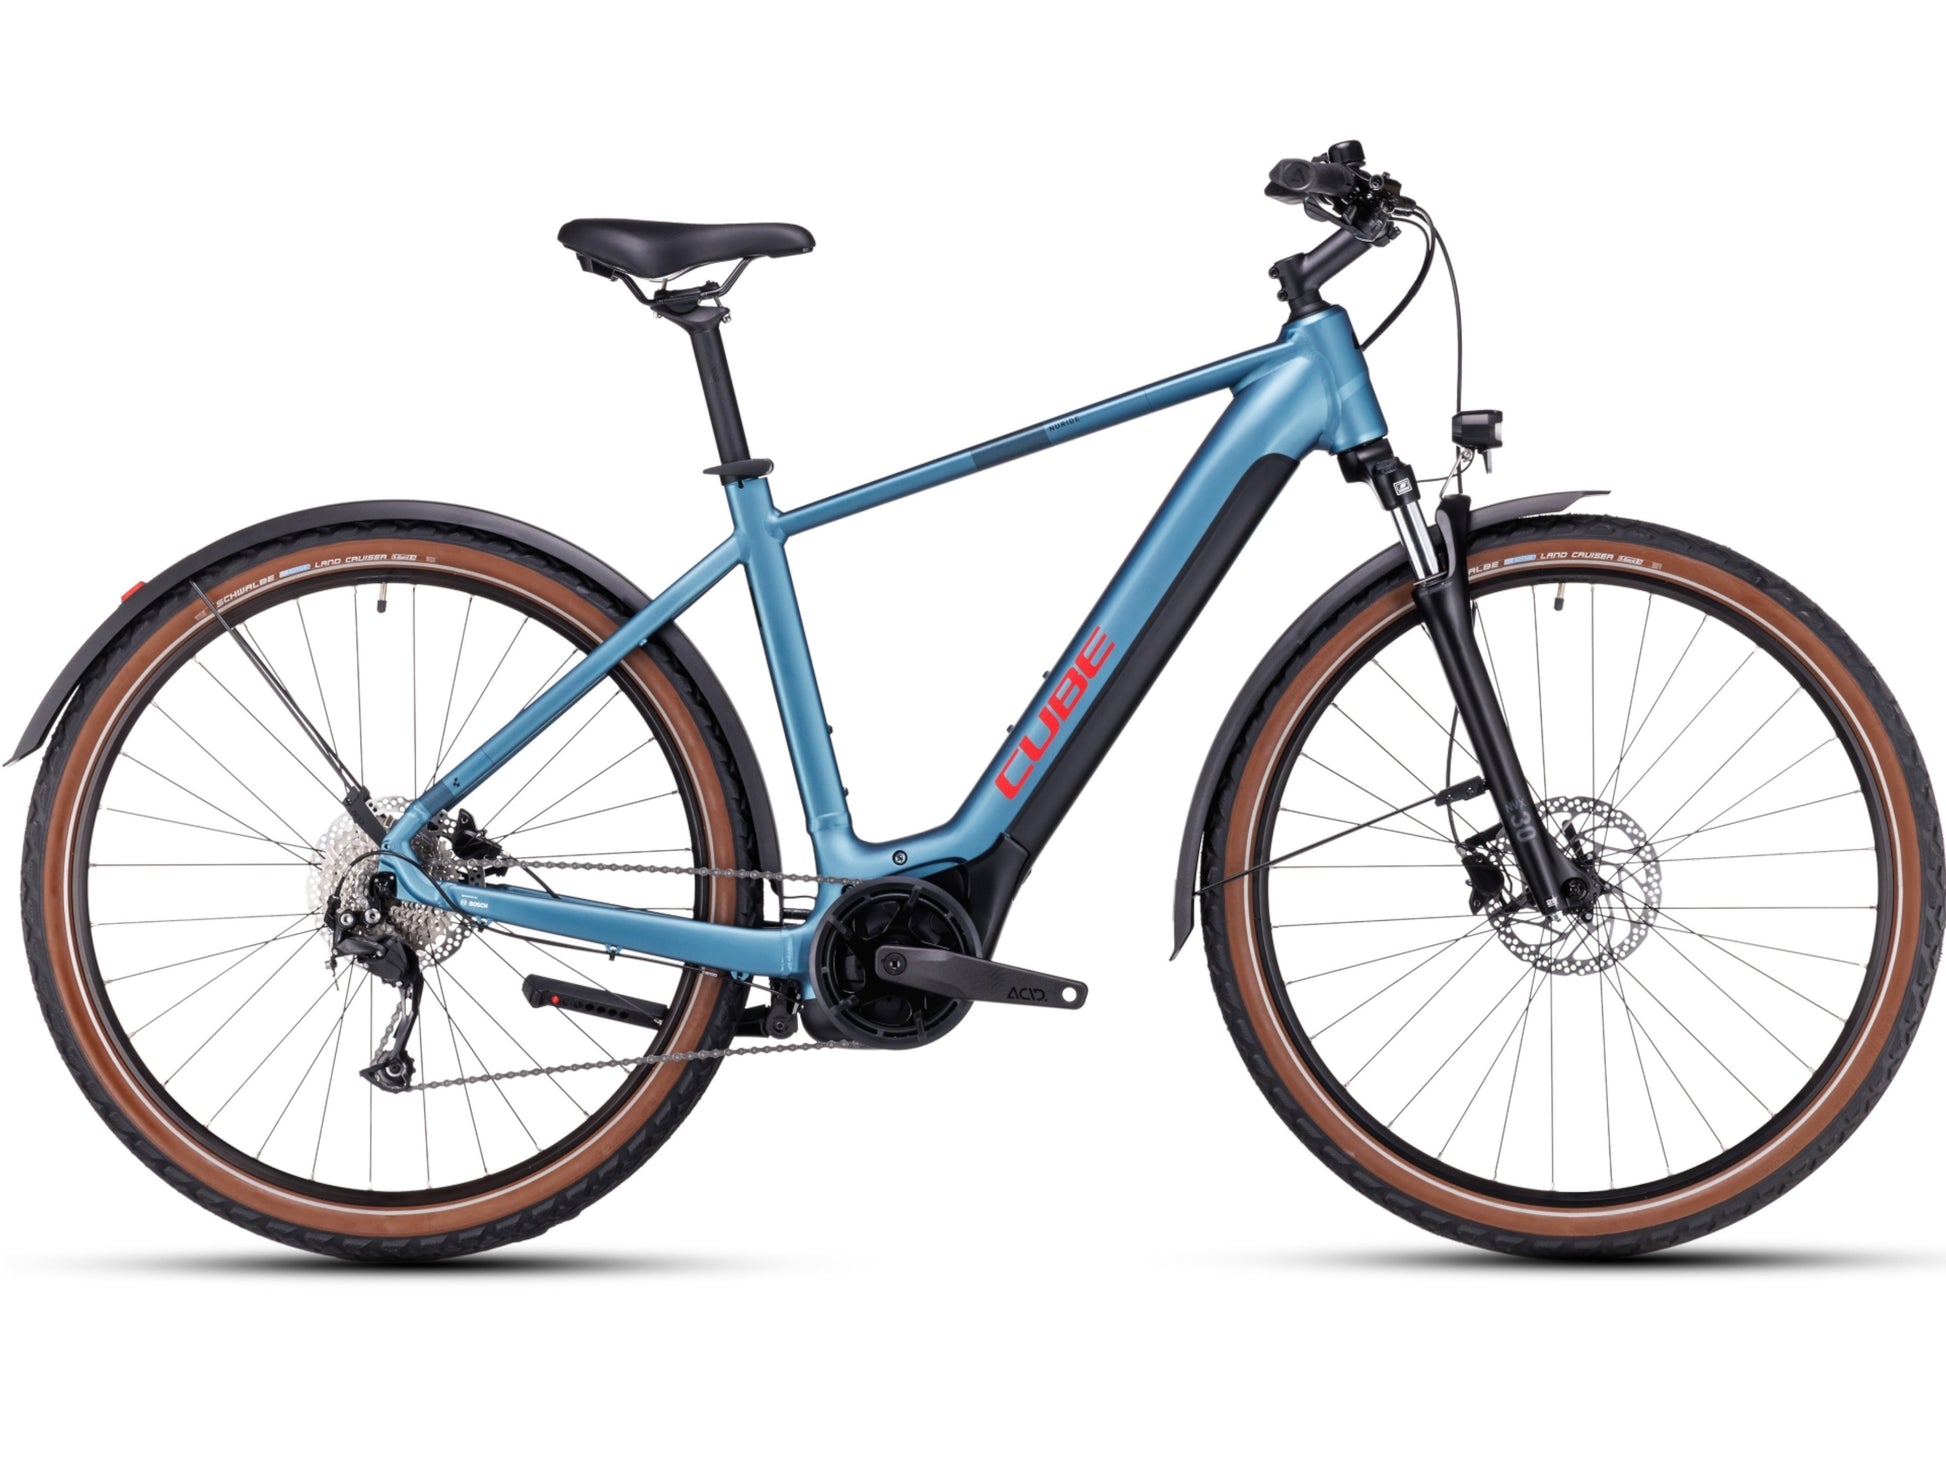 Cube Nuride Hybrid Performance 500 Allroad eMTB hardtail metalblue n red side profile on Fly Rides